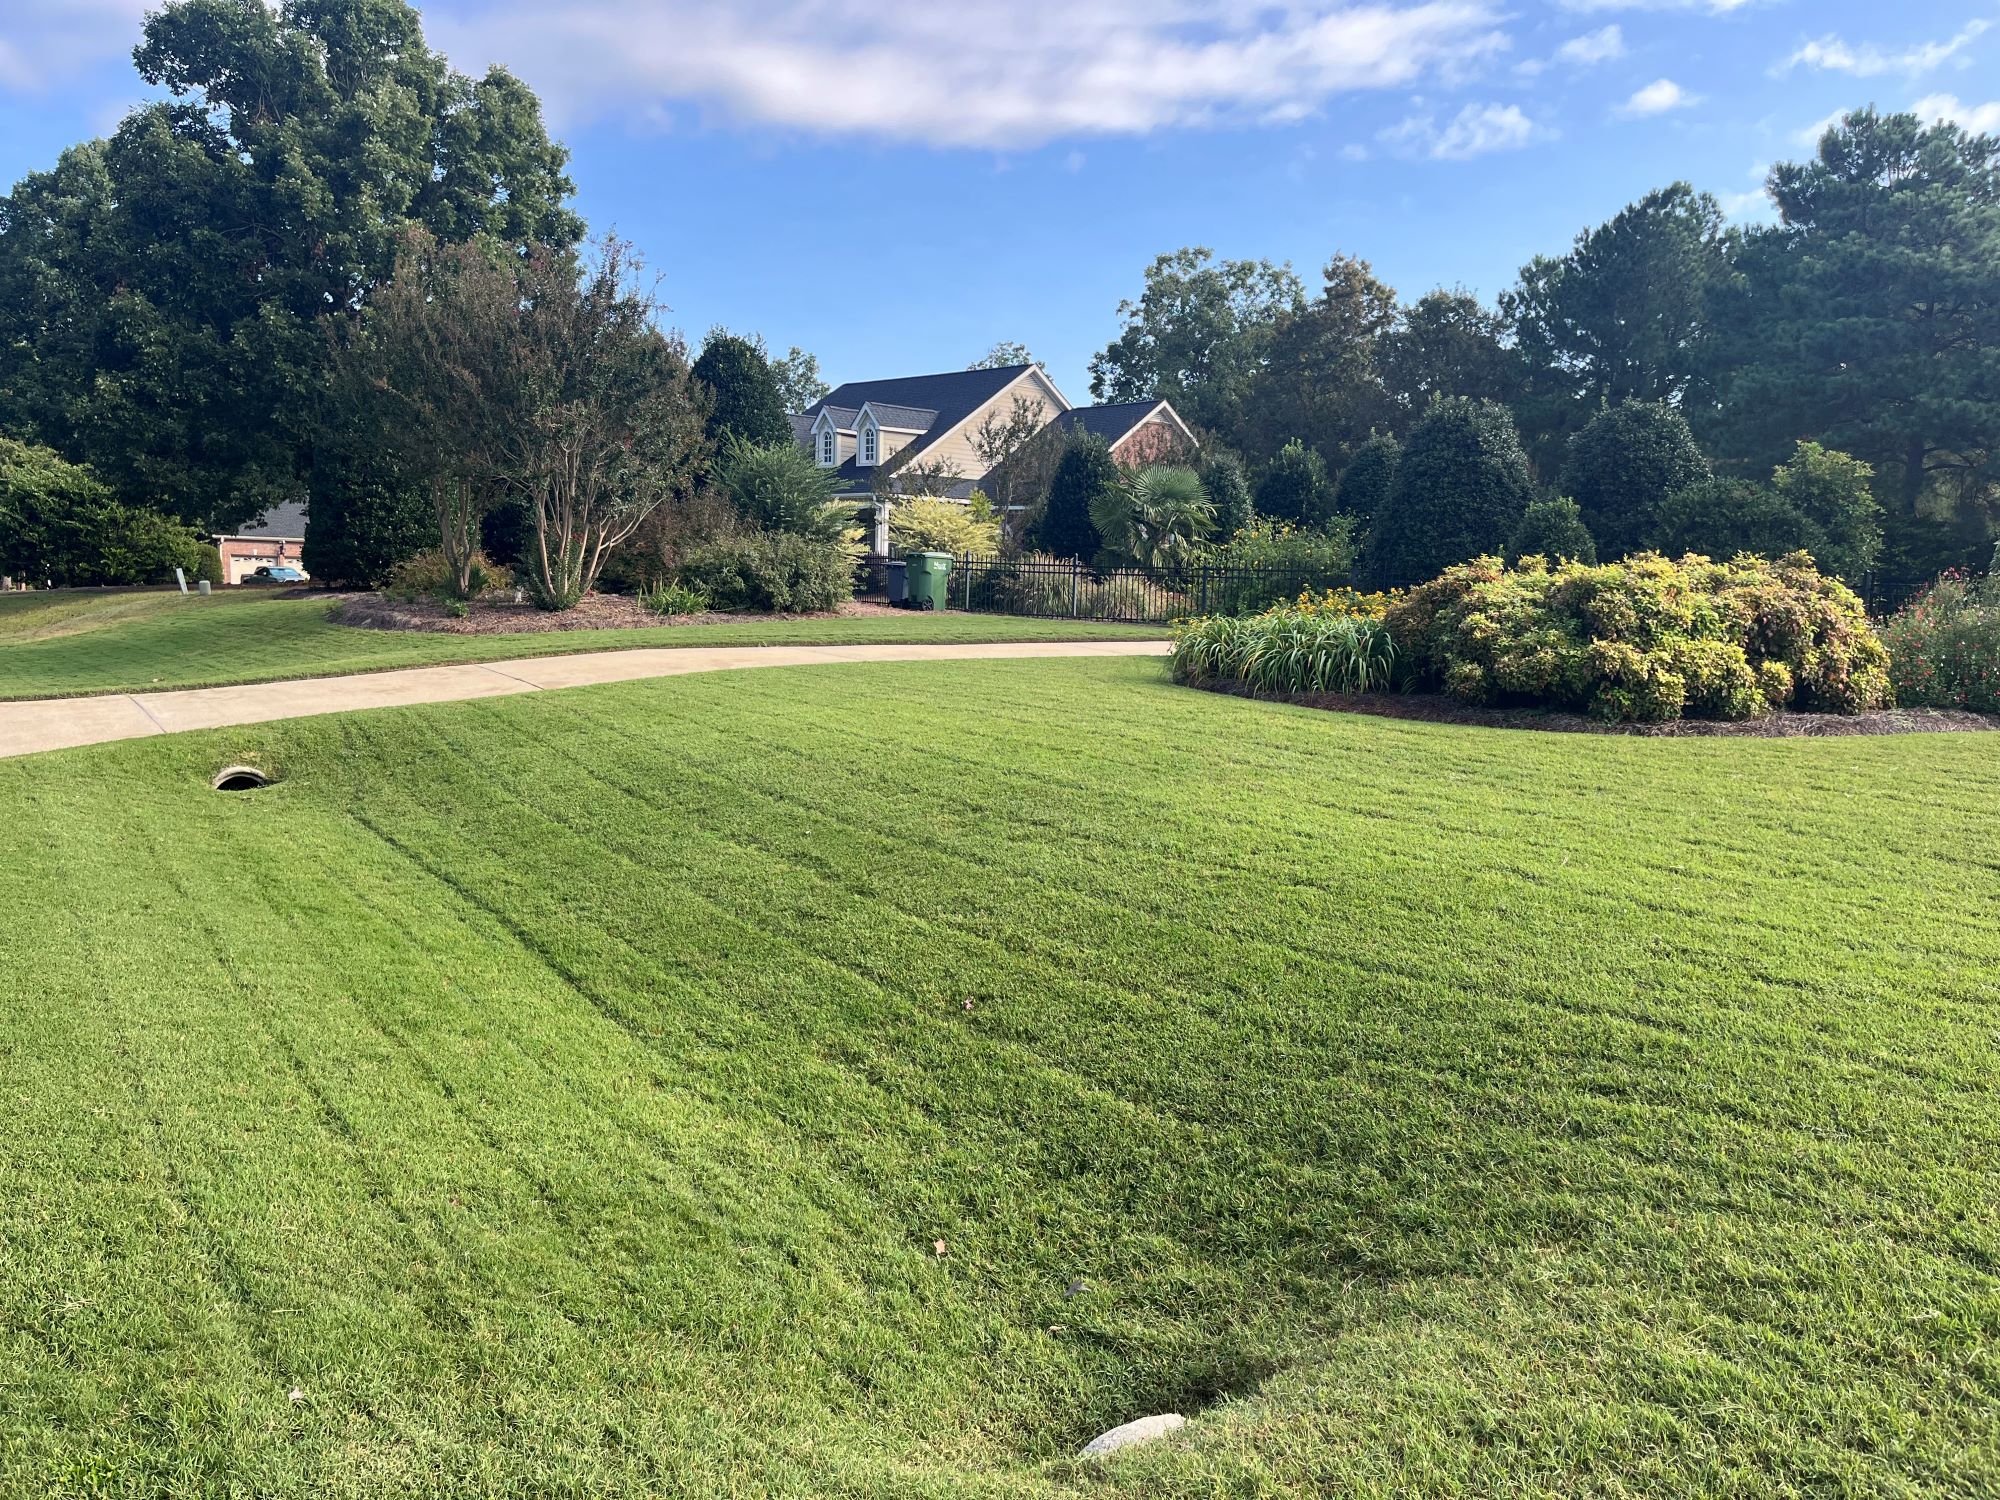 Enjoy beautiful landscaping without breaking the bank. Rudy's offers affordable landscaping solutions, ensuring your property looks its best within your budget.